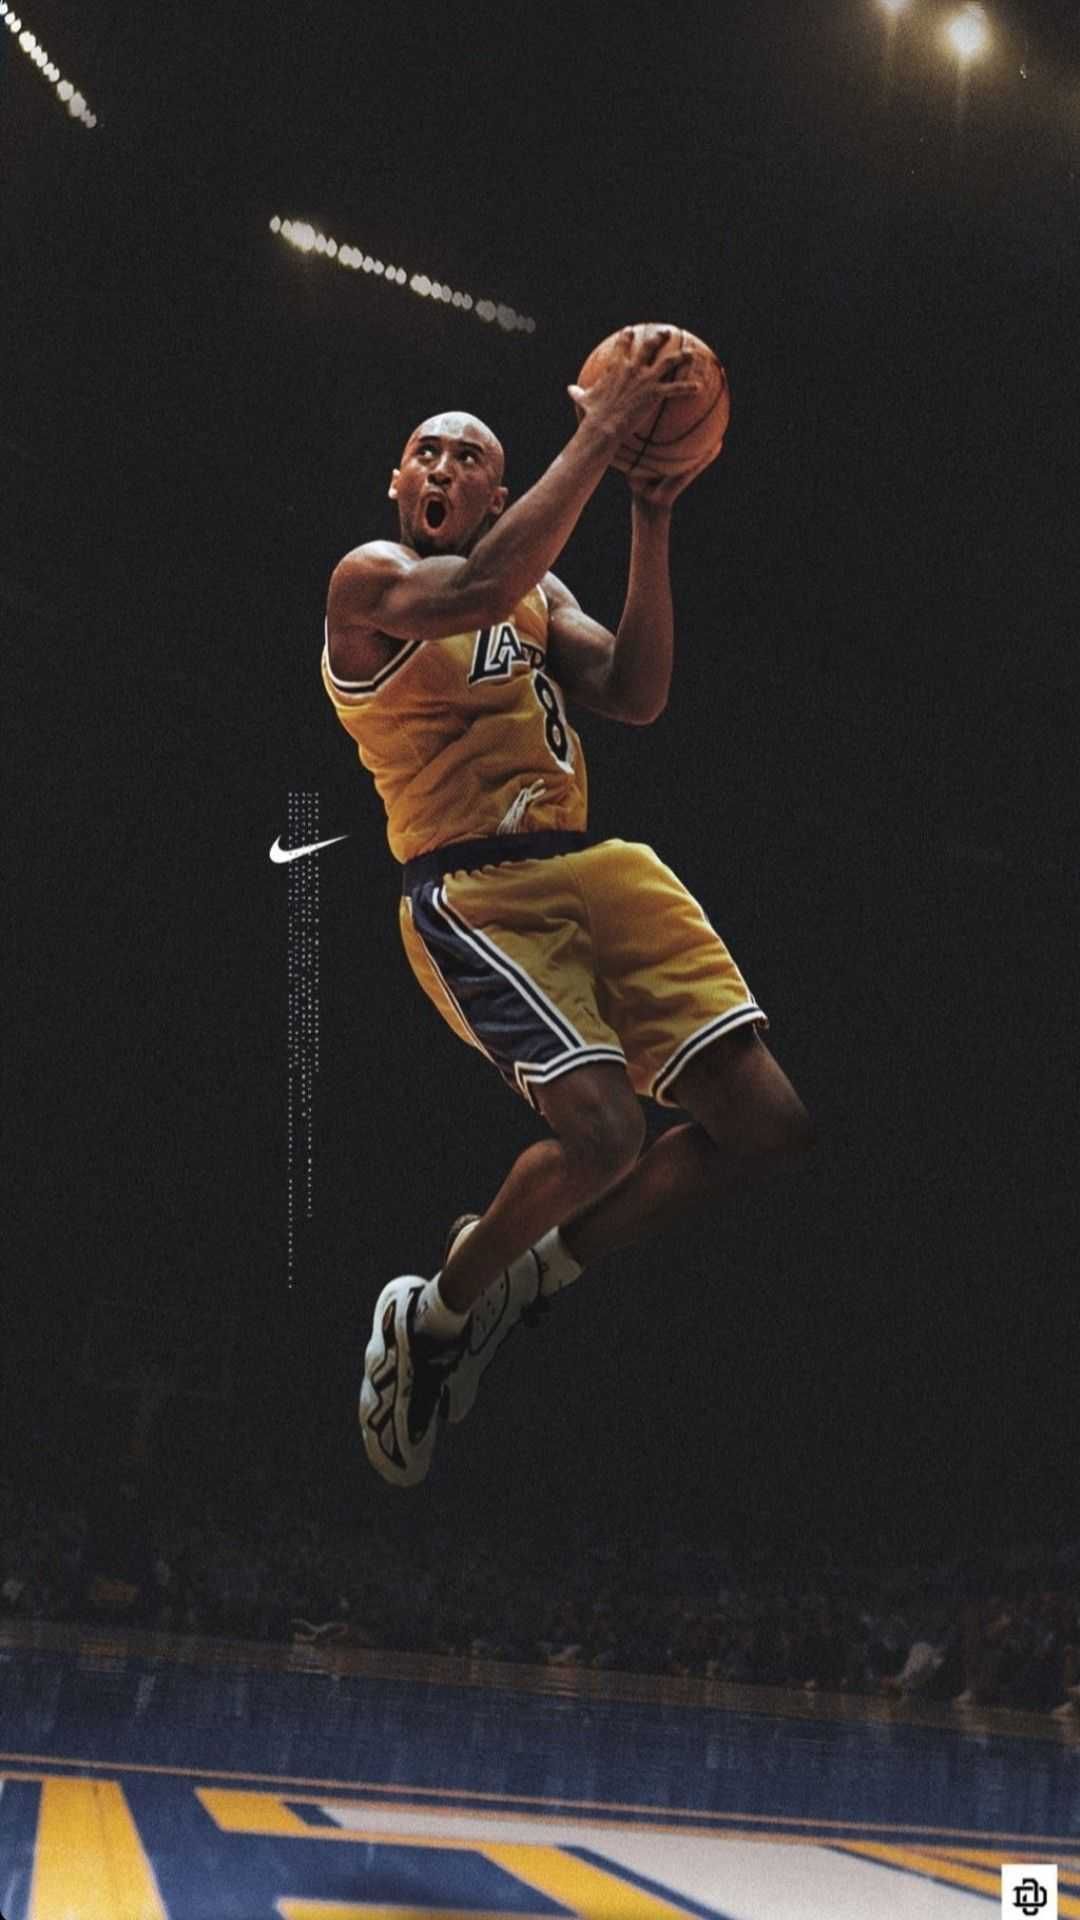 A man in yellow jersey dunking the basketball - Kobe Bryant